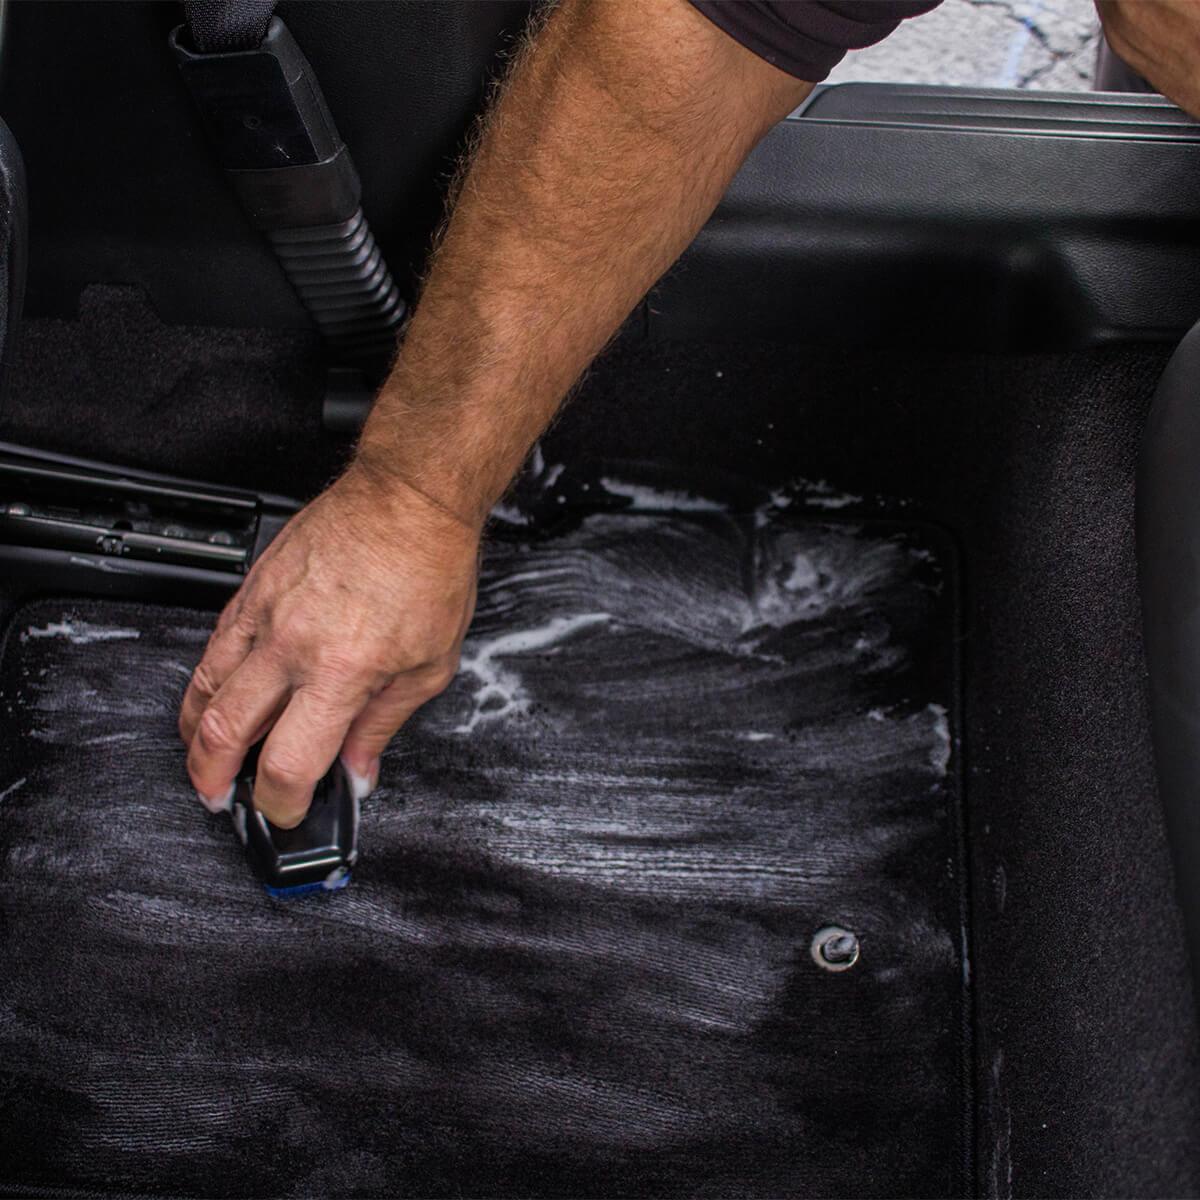 https://cdn.shopify.com/s/files/1/0261/5033/8613/t/6/assets/6488f0d15bbb--What-Is-The-Best-Shampoo-To-Clean-My-Car-Seats-Block-1-05bef2.jpg?v=1626121971